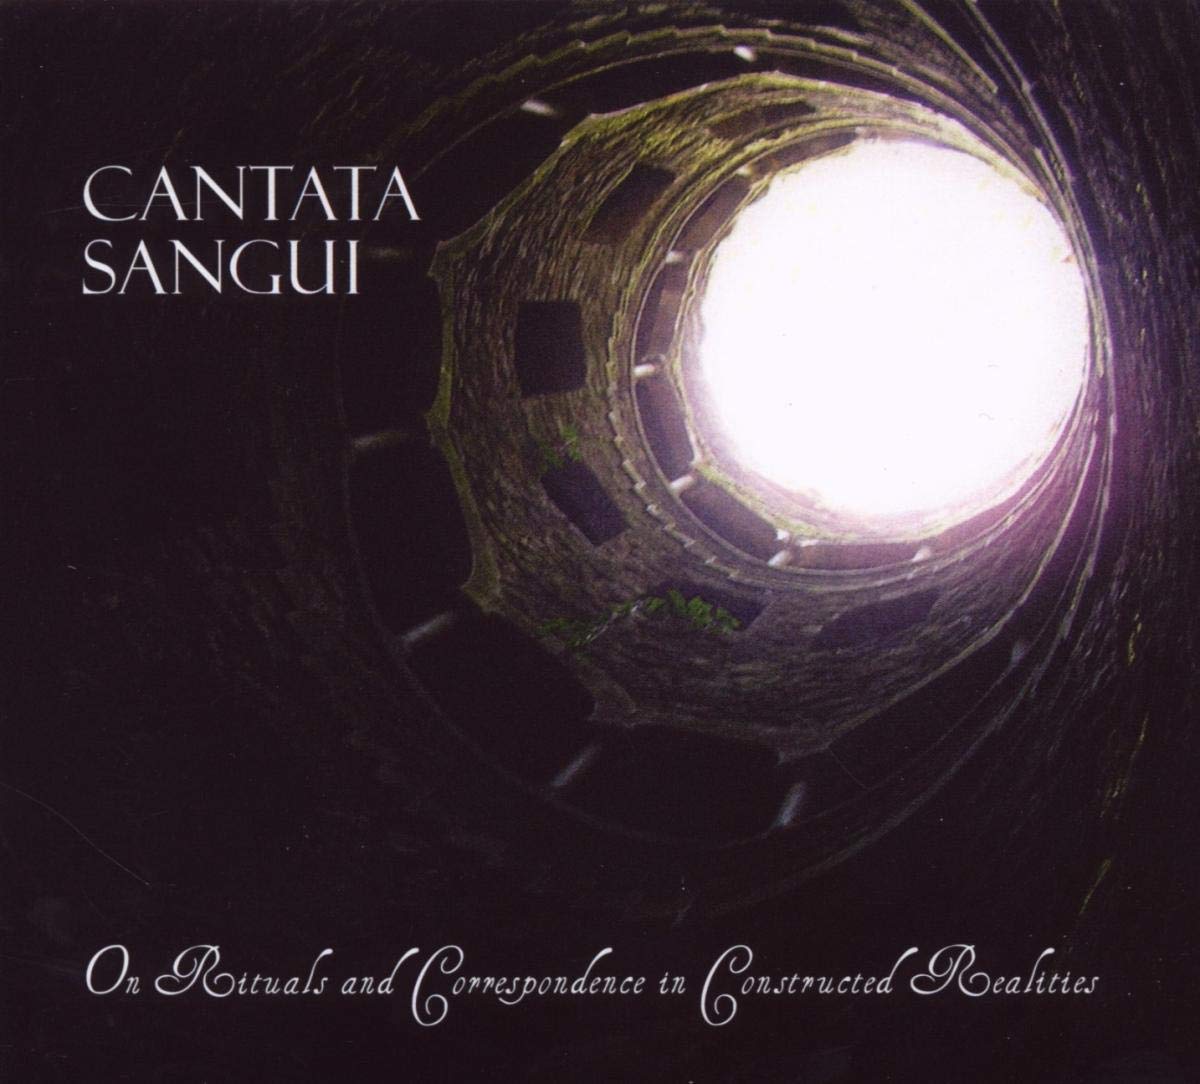 Cantata Sangui – On Rituals and Correspondence in Constructed Realities (2009) [FLAC]